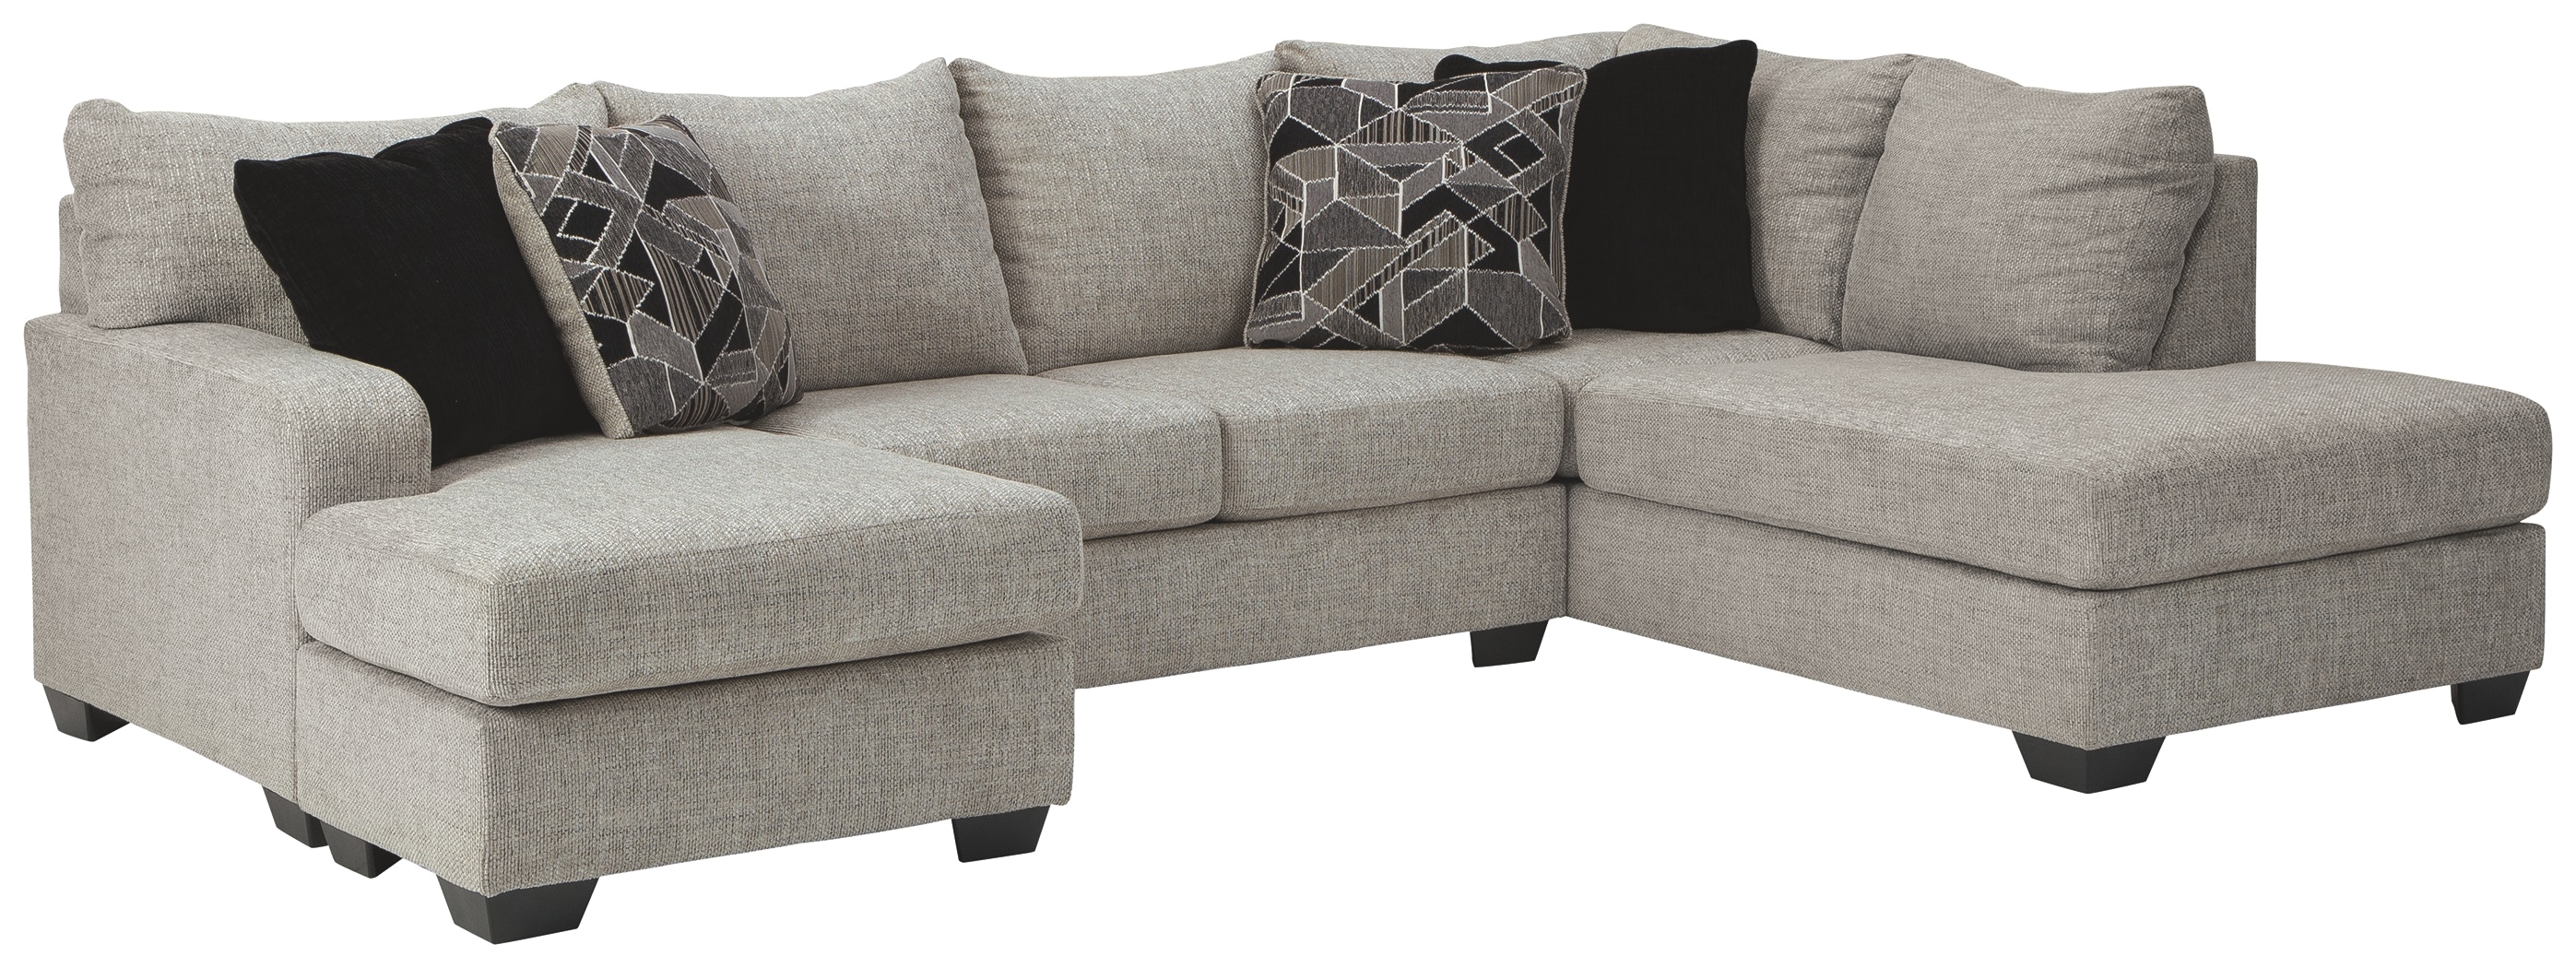 Benchcraft Living Room Megginson 2-Piece Sectional with Chaise 